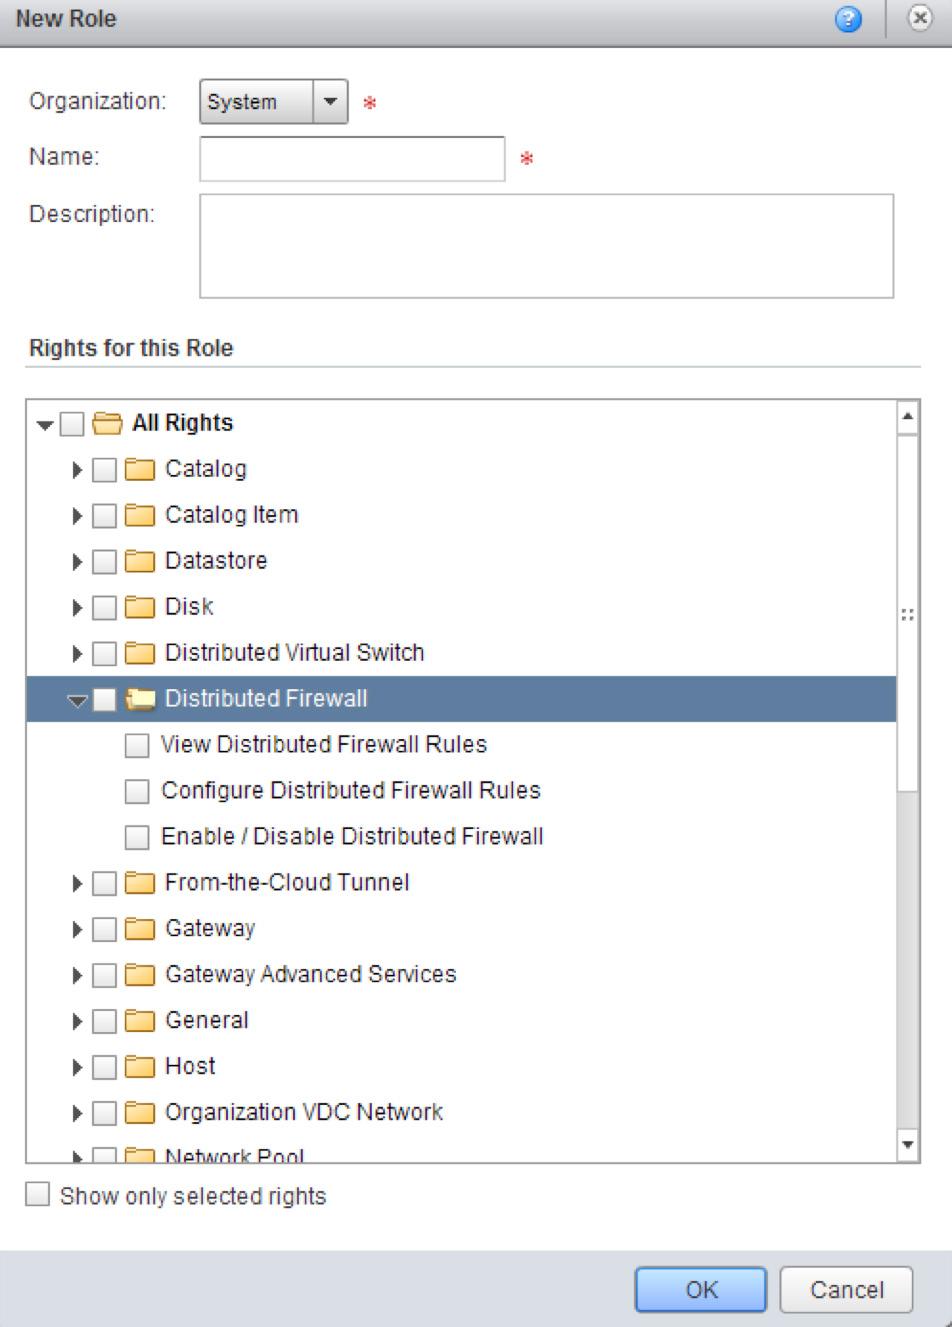 vcloud Director 8.20 allows the creation of custom roles for service provider tenants. You can define the roles based on functional tasks and subtasks within the vcloud Director system administration.